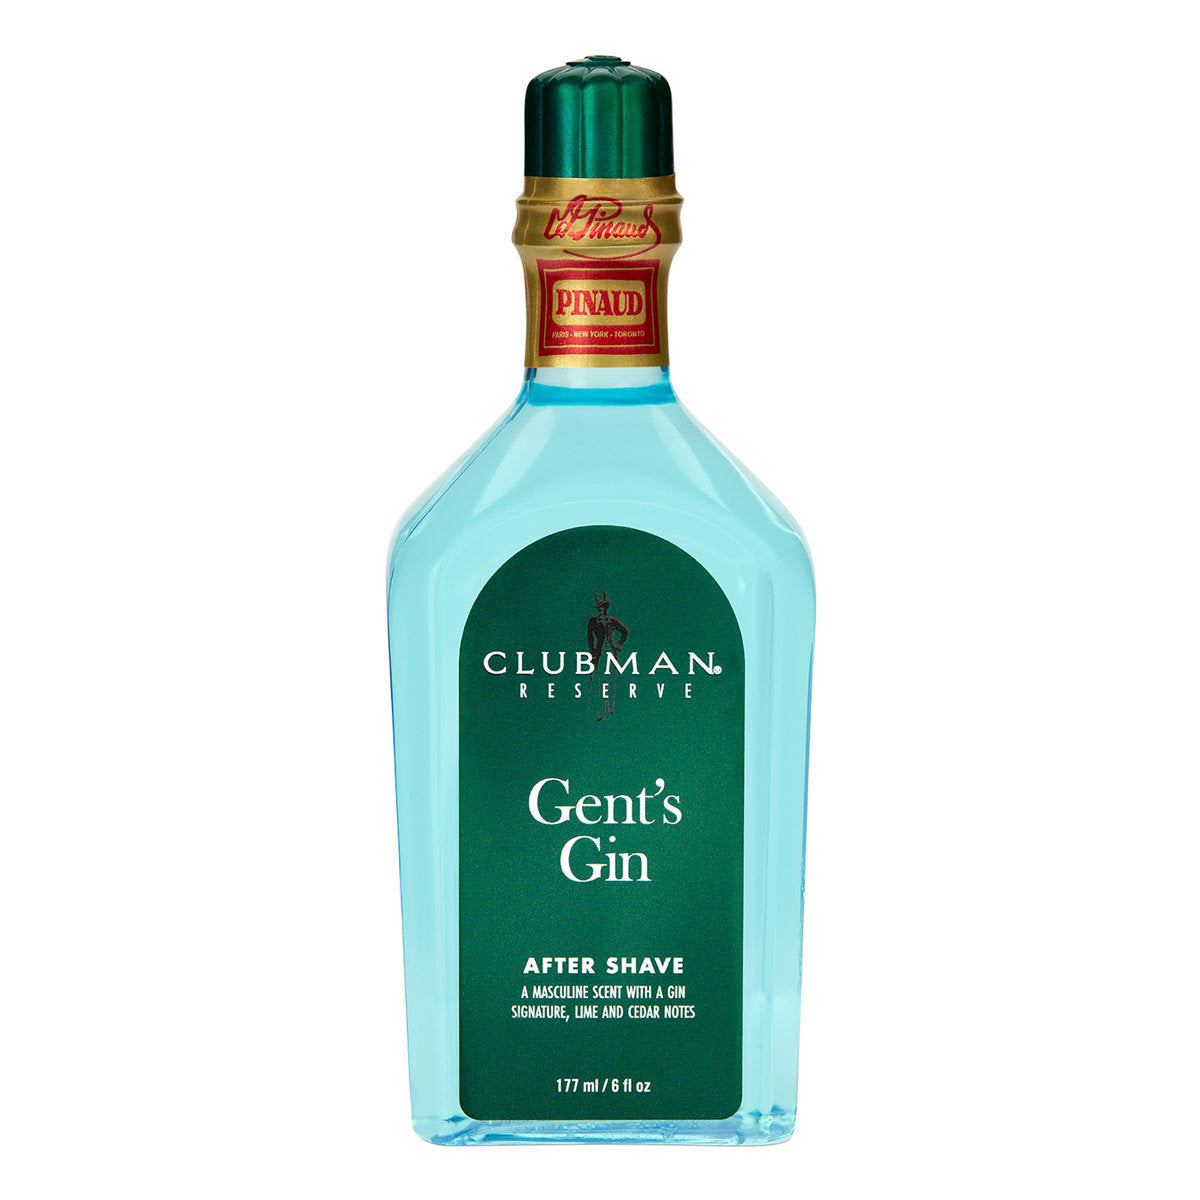 Primary image of Gent's Gin Aftershave